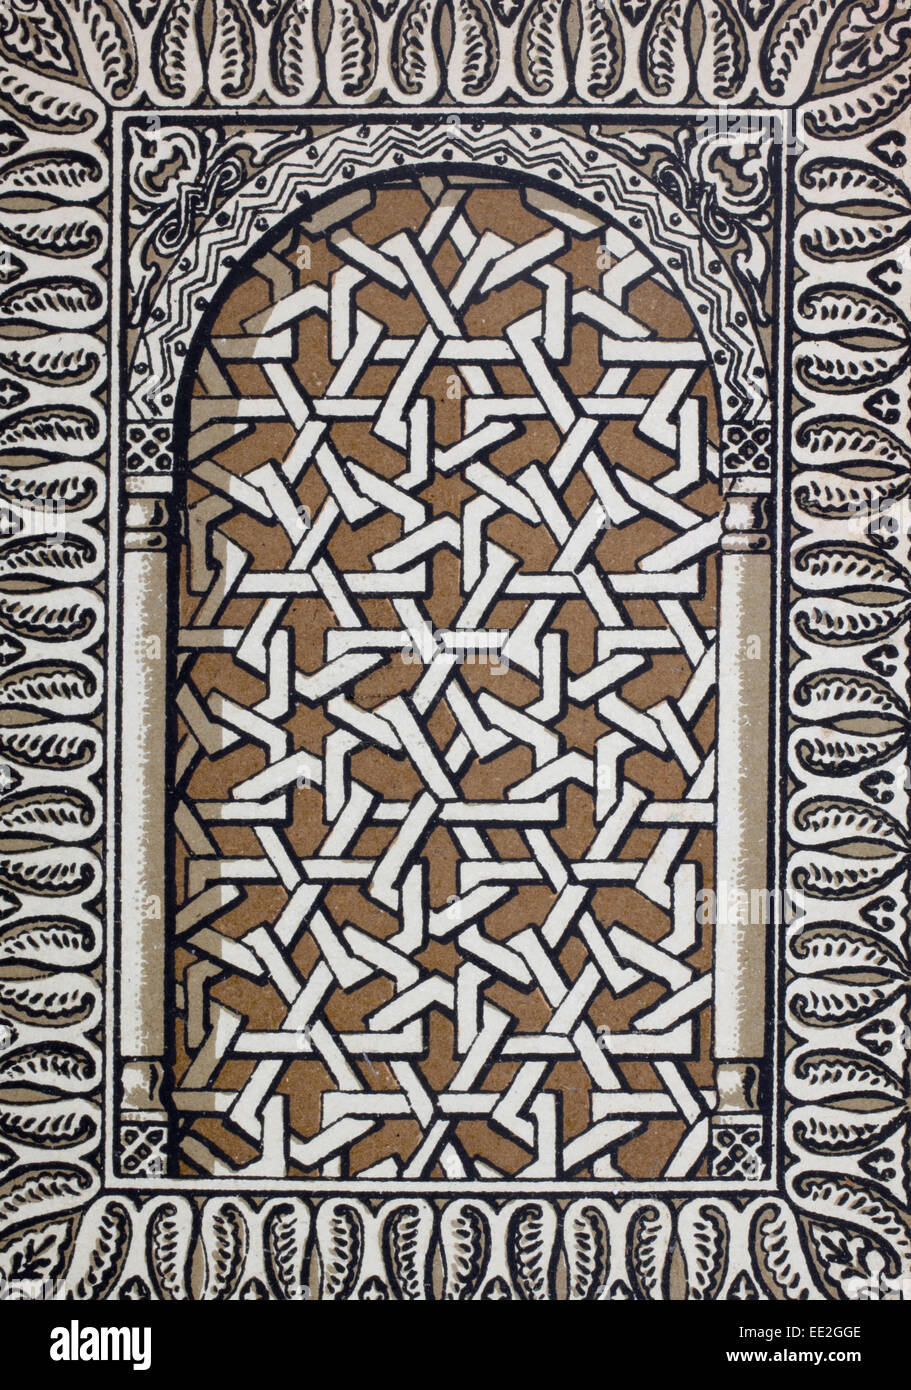 Complex geometrical design elements typically found in Arabic architecture. Stock Photo